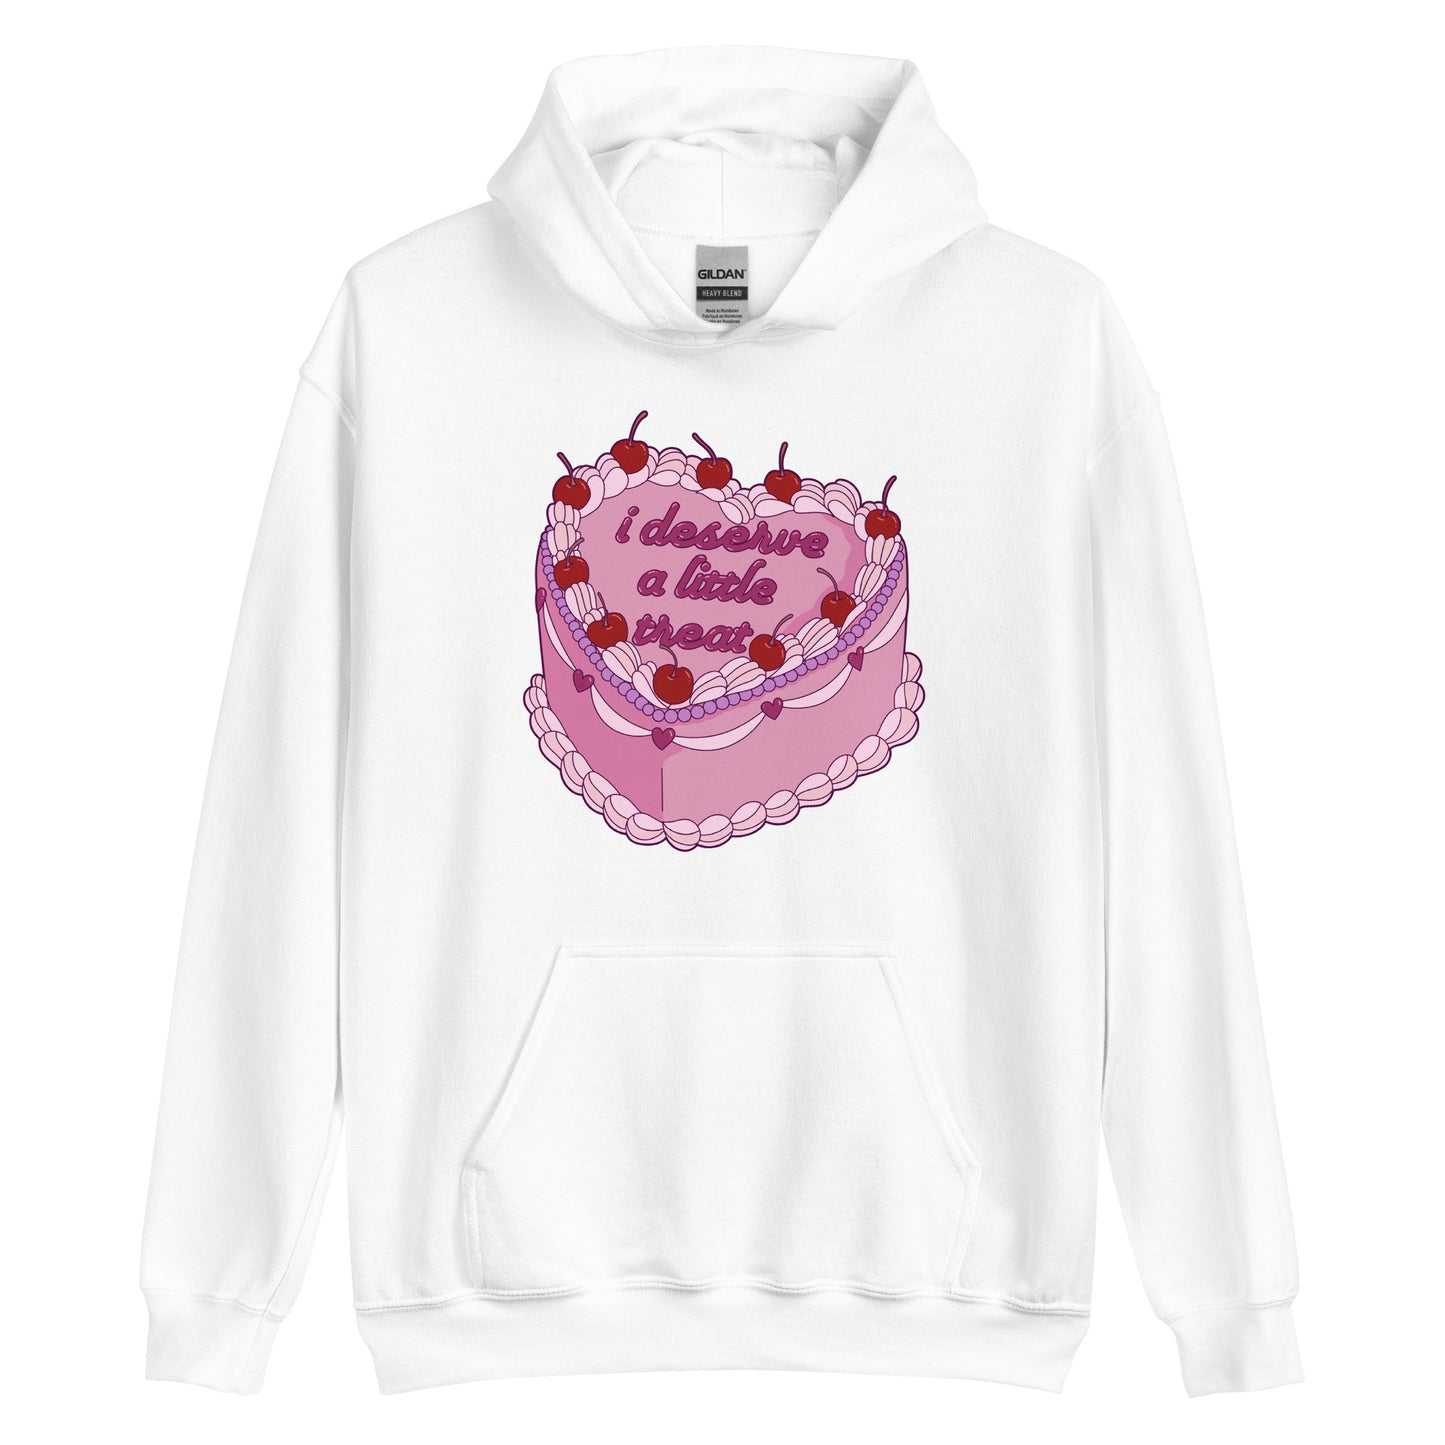 A white hooded sweatshirt featuring an illustration of an elaborately decorated pink cake. Icing on the cake reads "i deserve a little treat" in a cursive font.